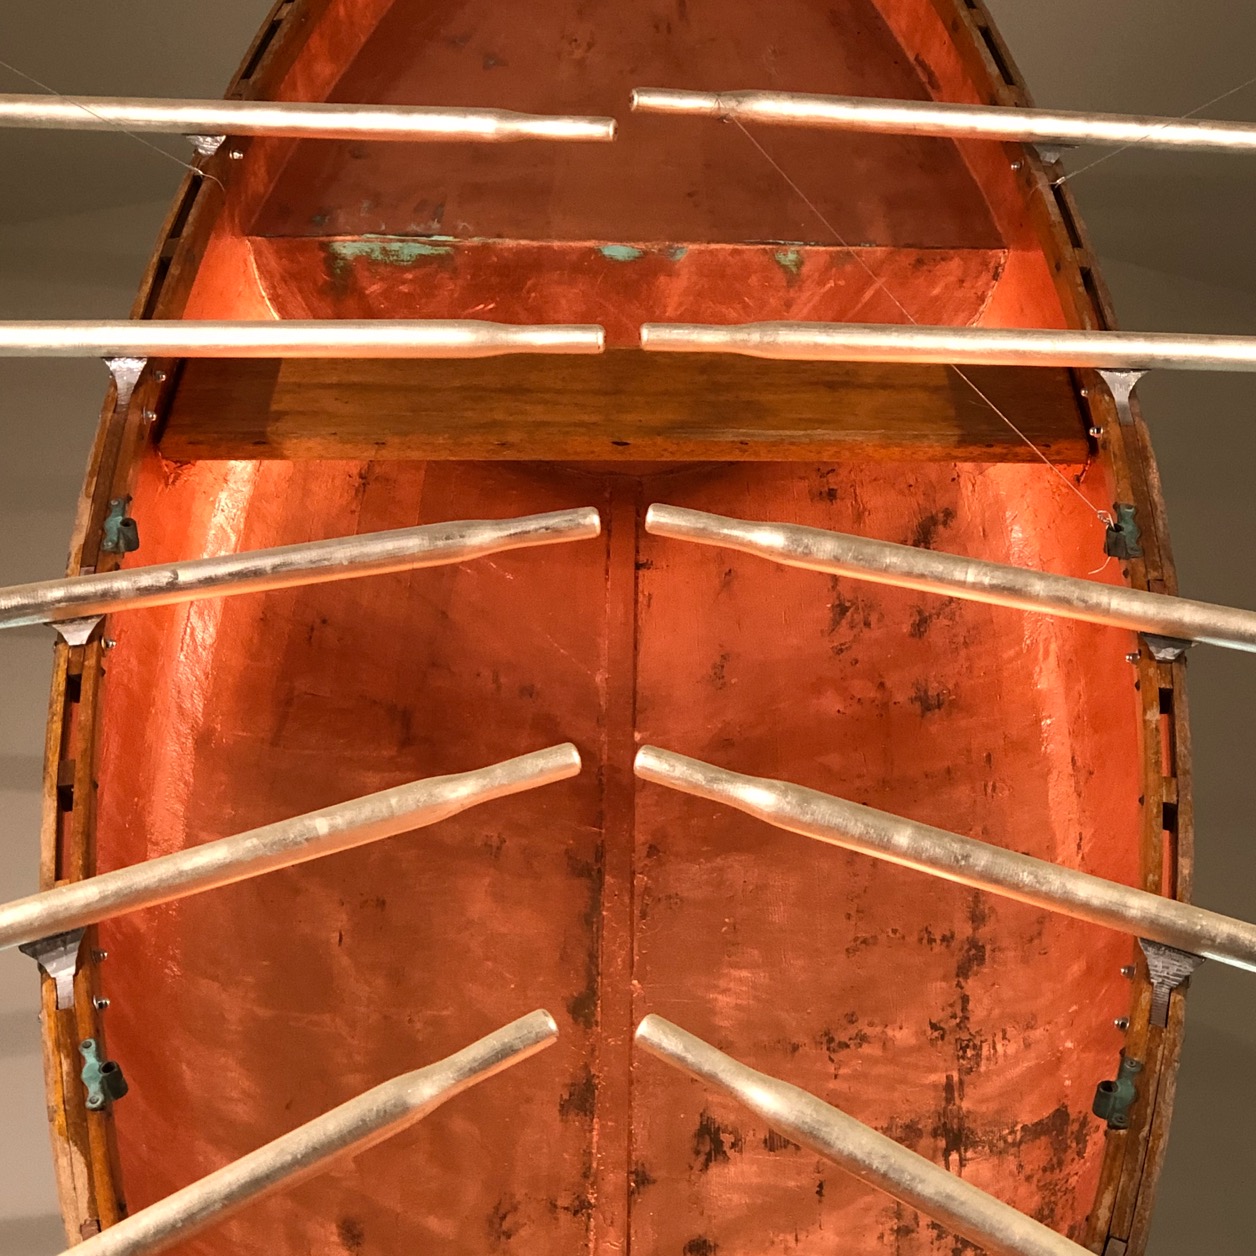 A canoe with and orange interior and golden oars, from the Bill Reid art museum